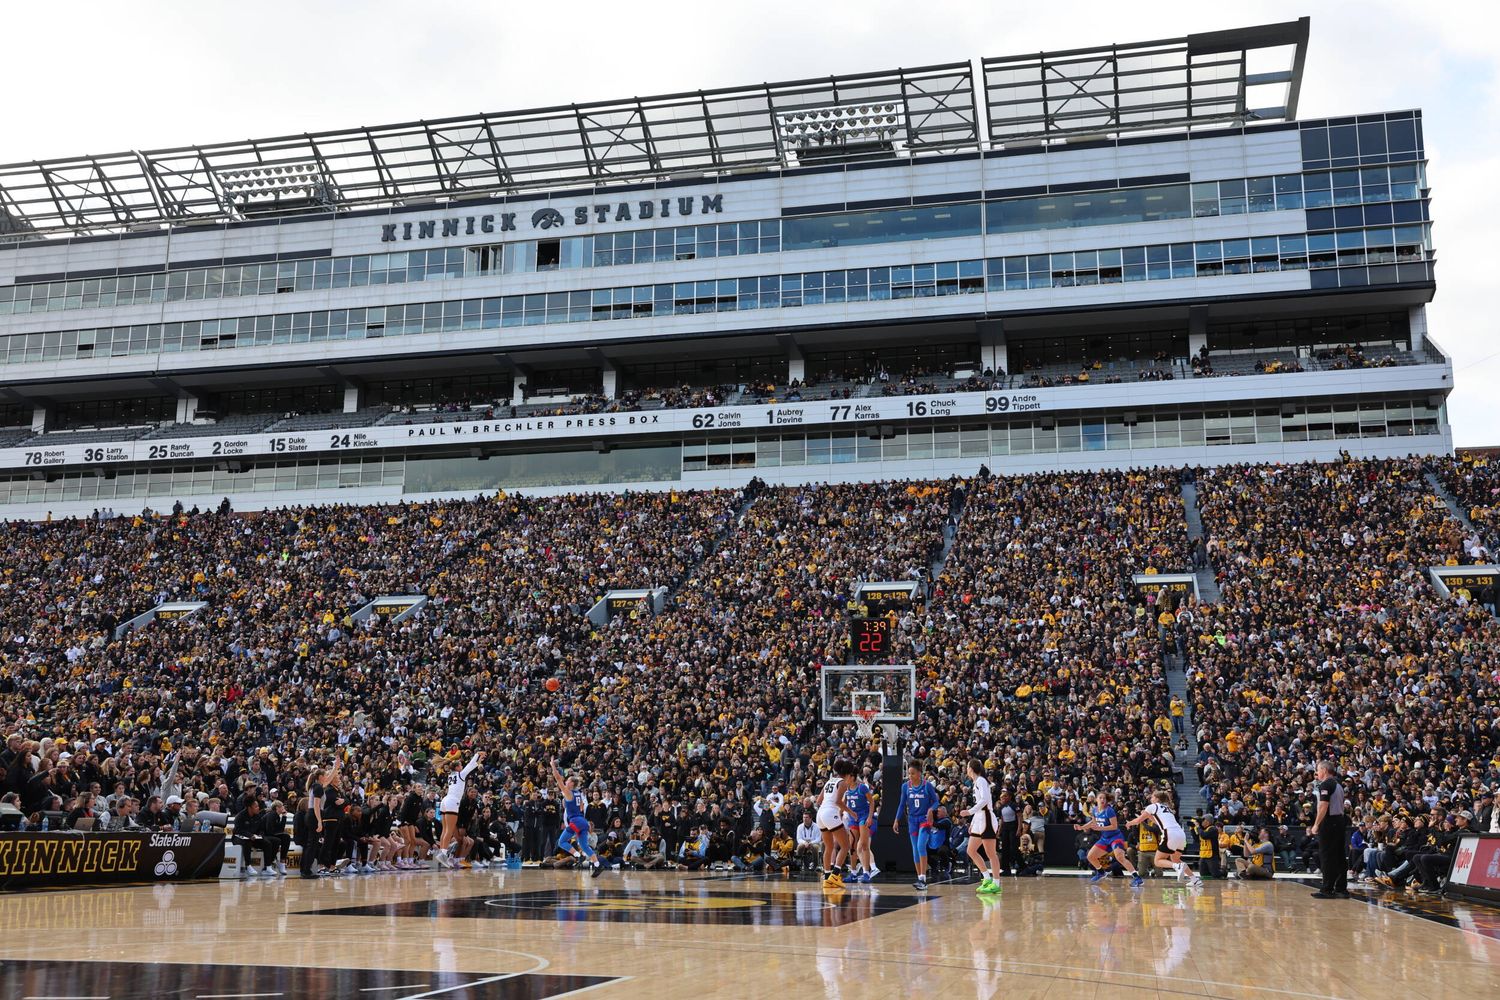 Kentucky vs. Iowa basketball game will feature dueling All-Americans